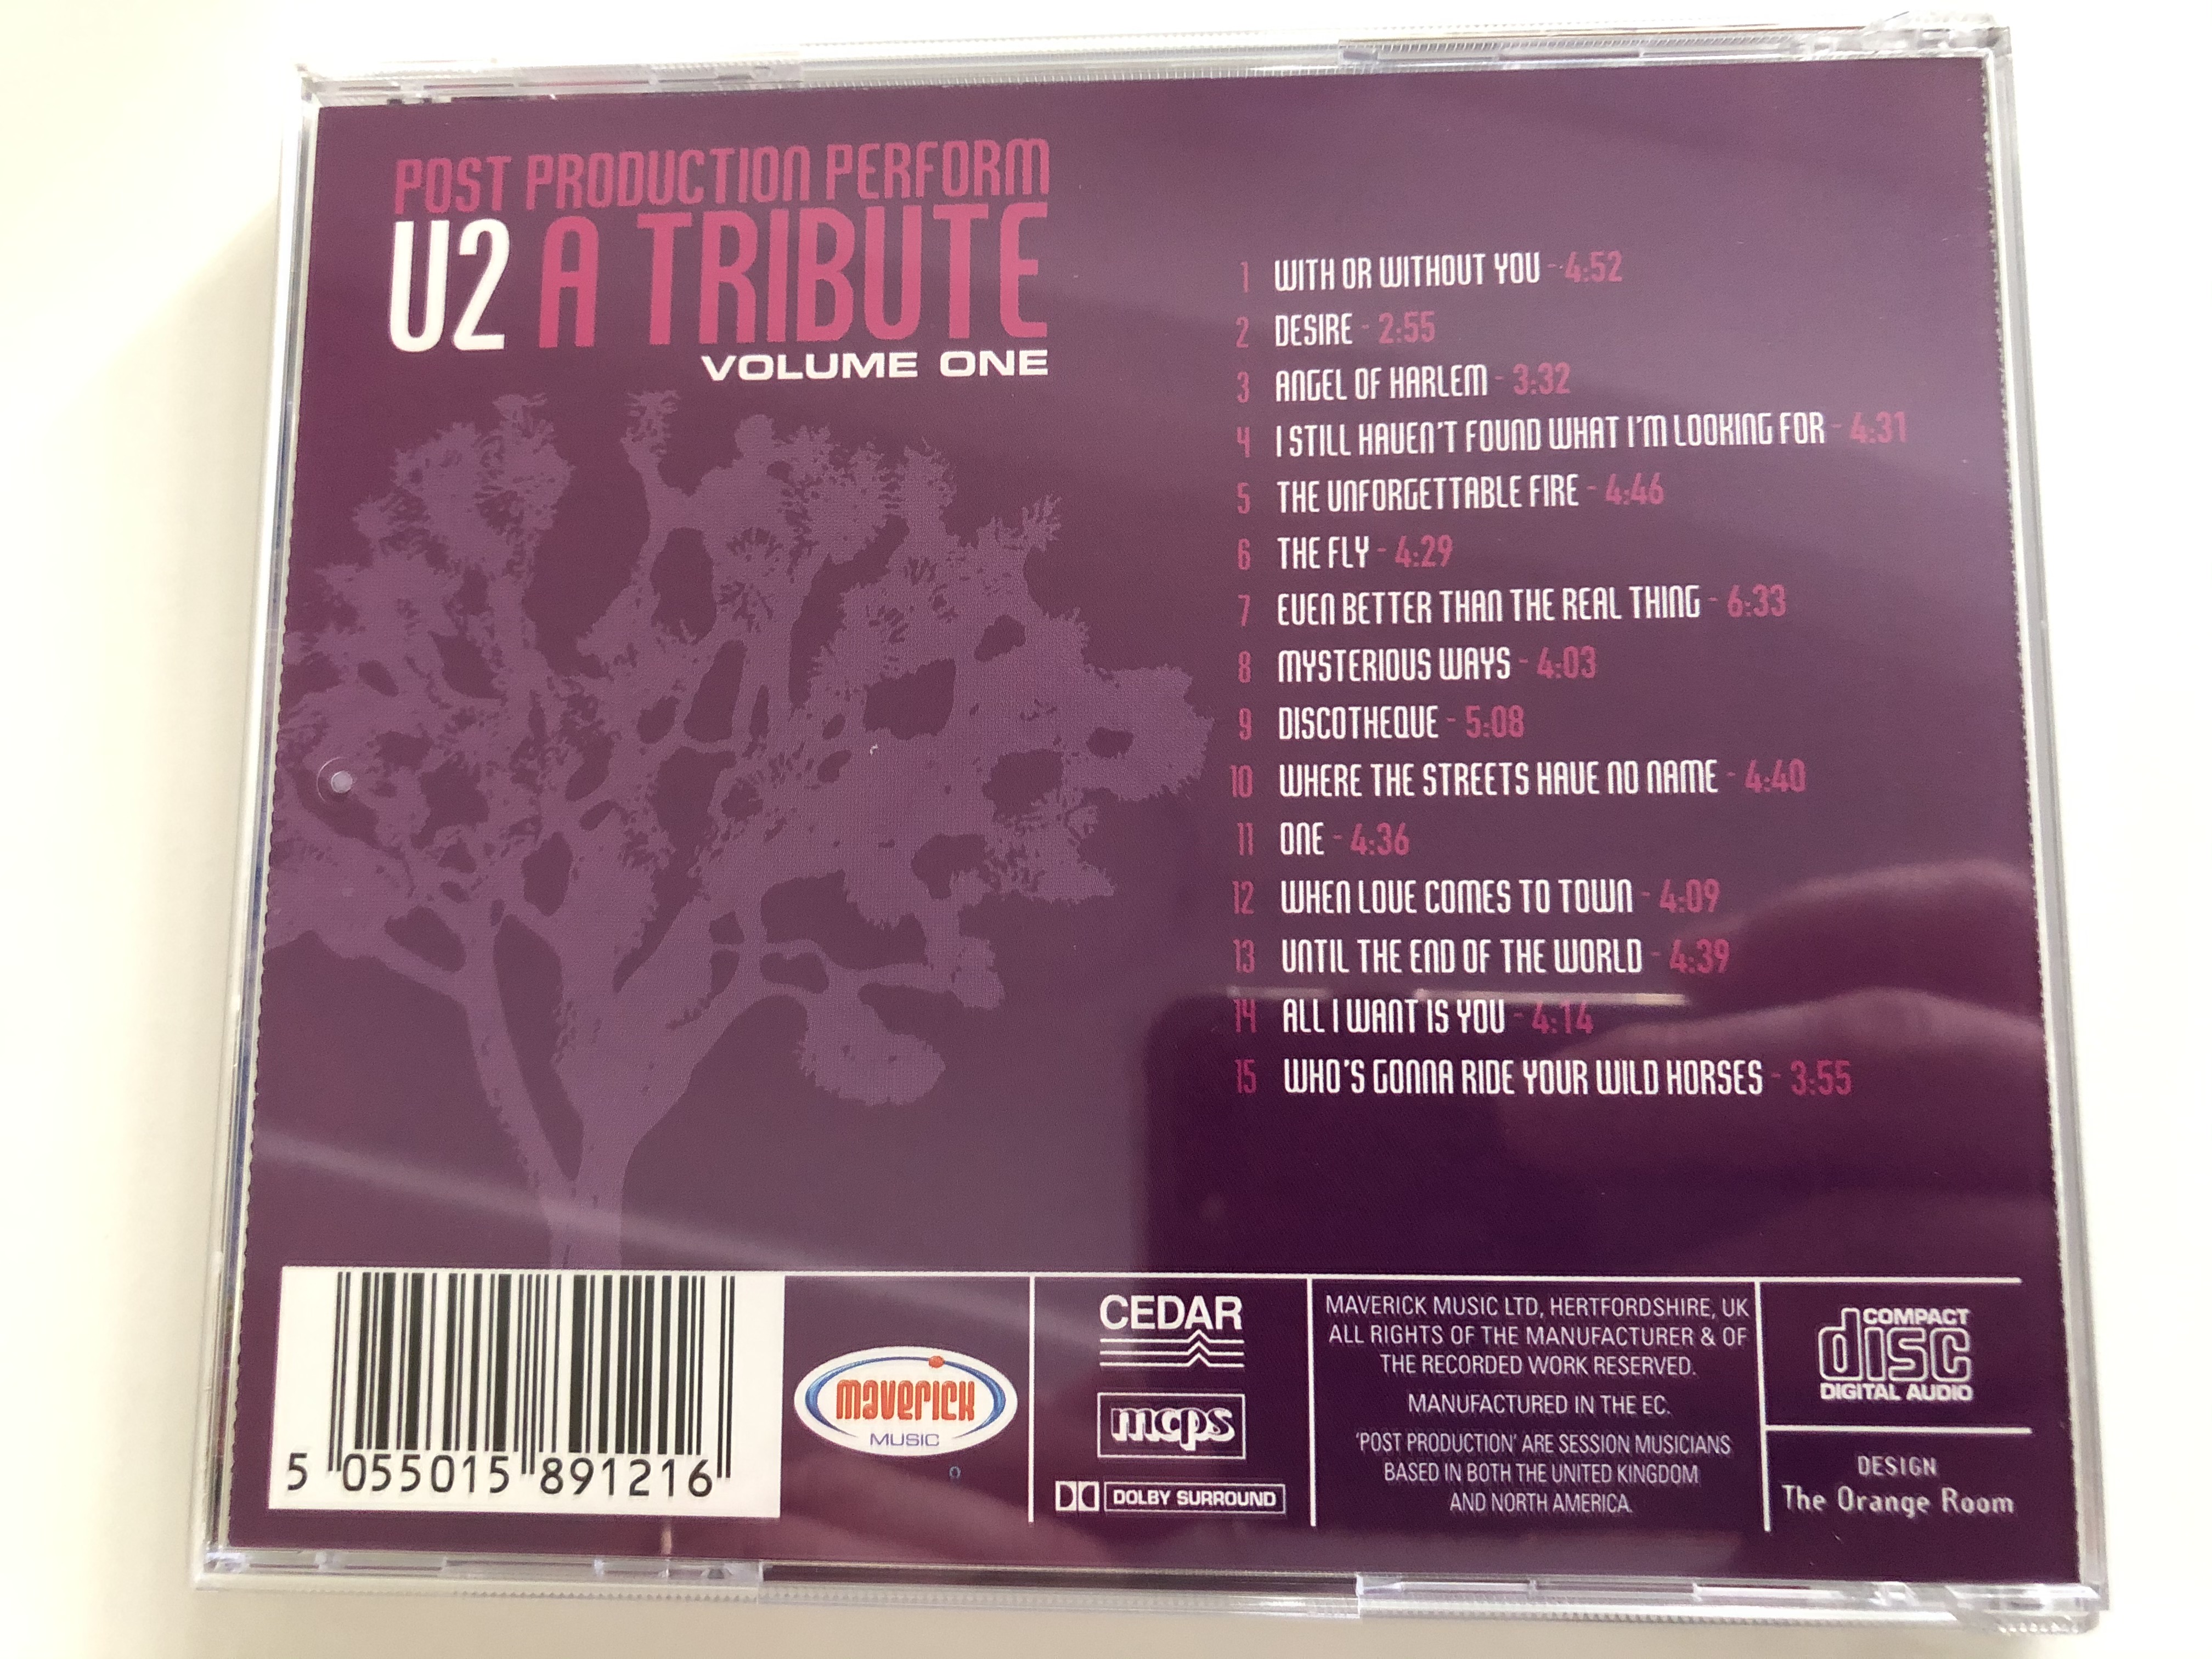 u2-a-tribute-volume-one-post-profuction-perform-where-the-streets-have-no-name-discotheque-angel-of-harlem-mysterious-ways-with-or-without-you-and-more...-maverick-music-audio-cd-4-.jpg